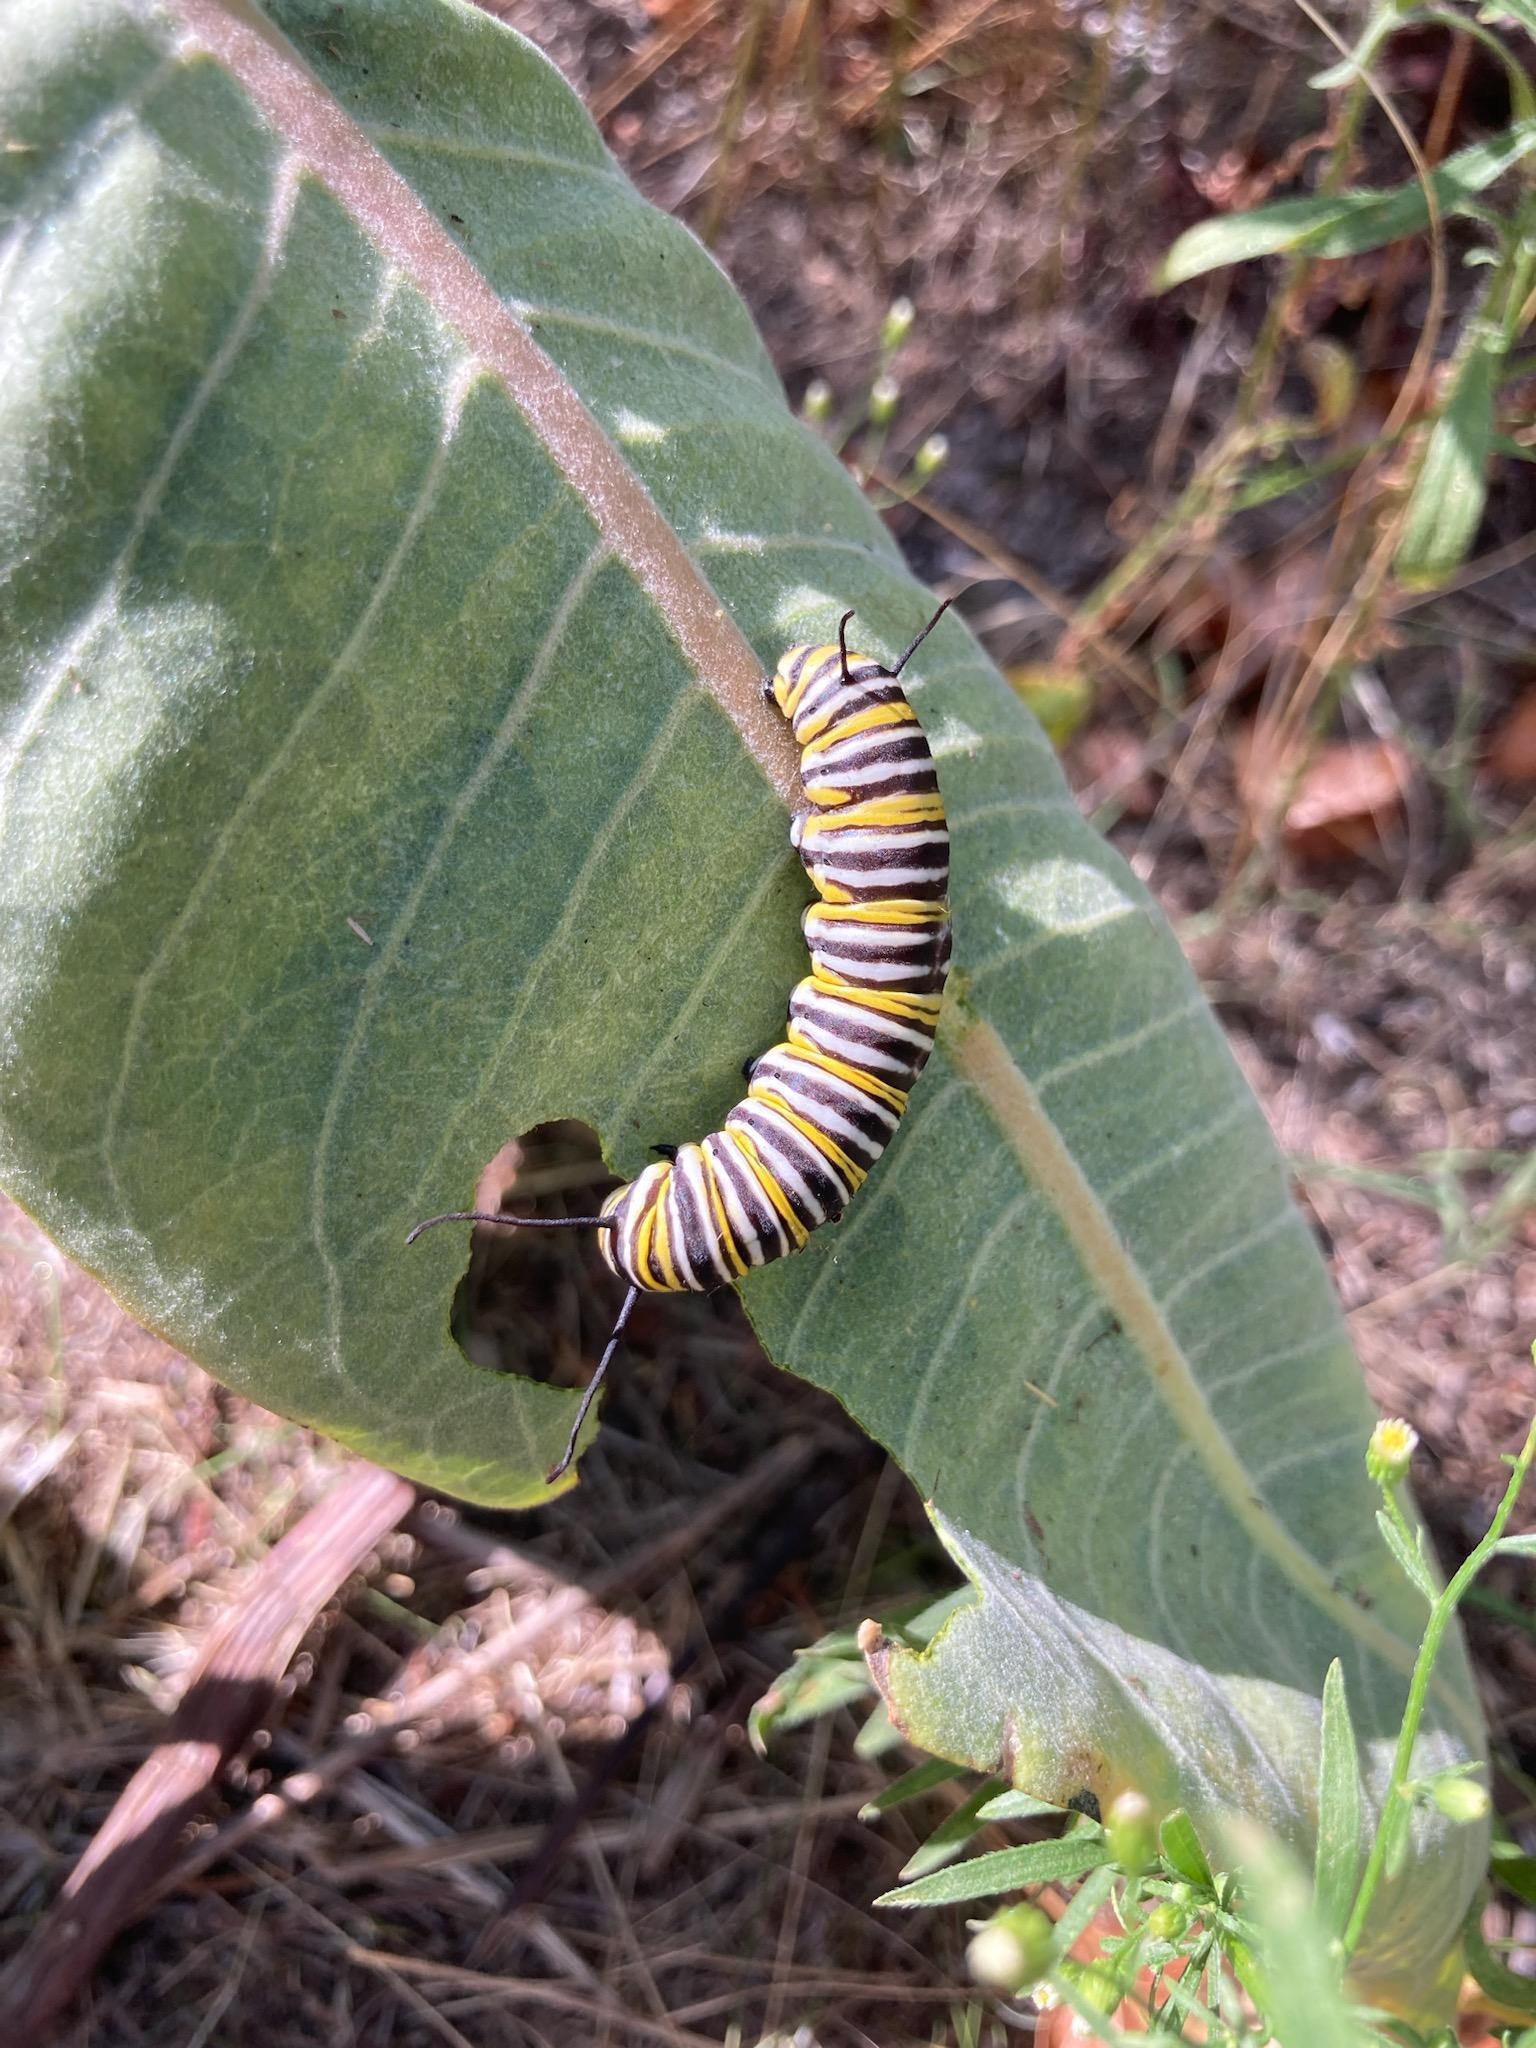 a chunky fat caterpillar with black, white, and yellow stripes sits on a milkweed leaf. The leaf has large bite marks in it. The caterpillar's small antenna-like filaments are perked into the air, giving it a very cute and friendly appearance